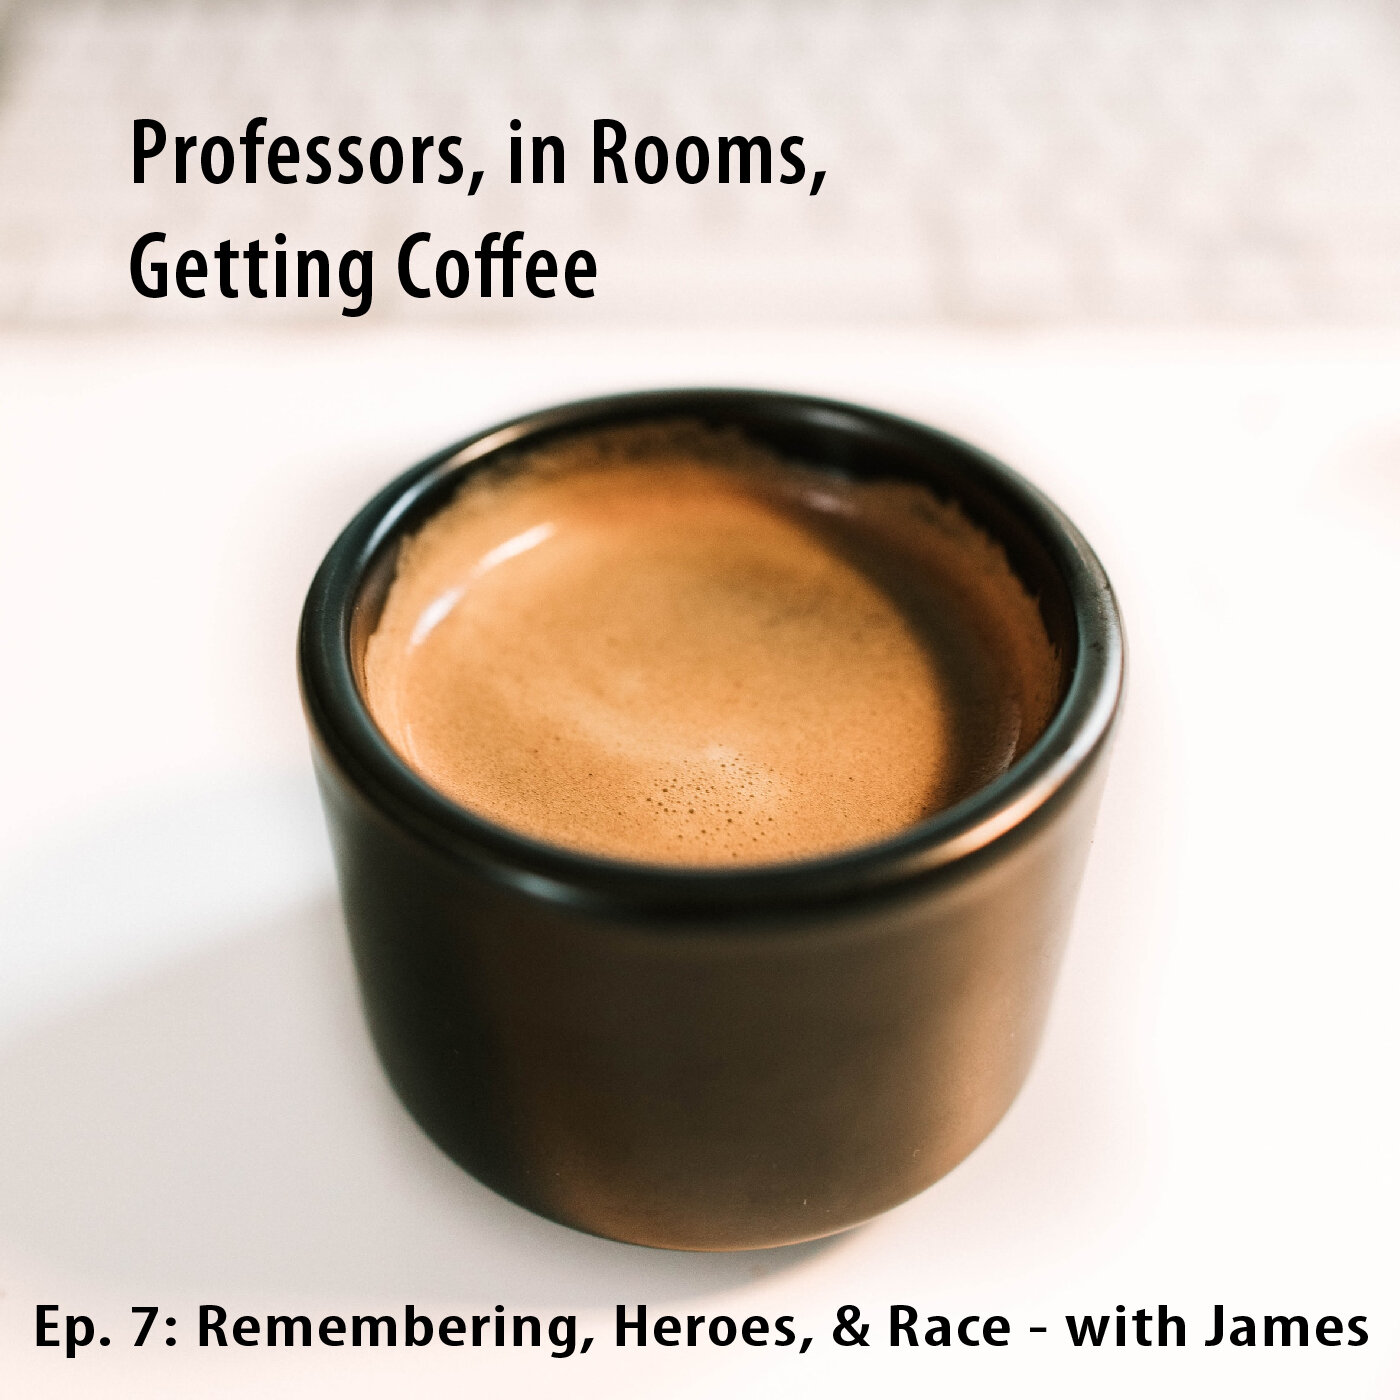 Remembering, Heroes, and Race- with James